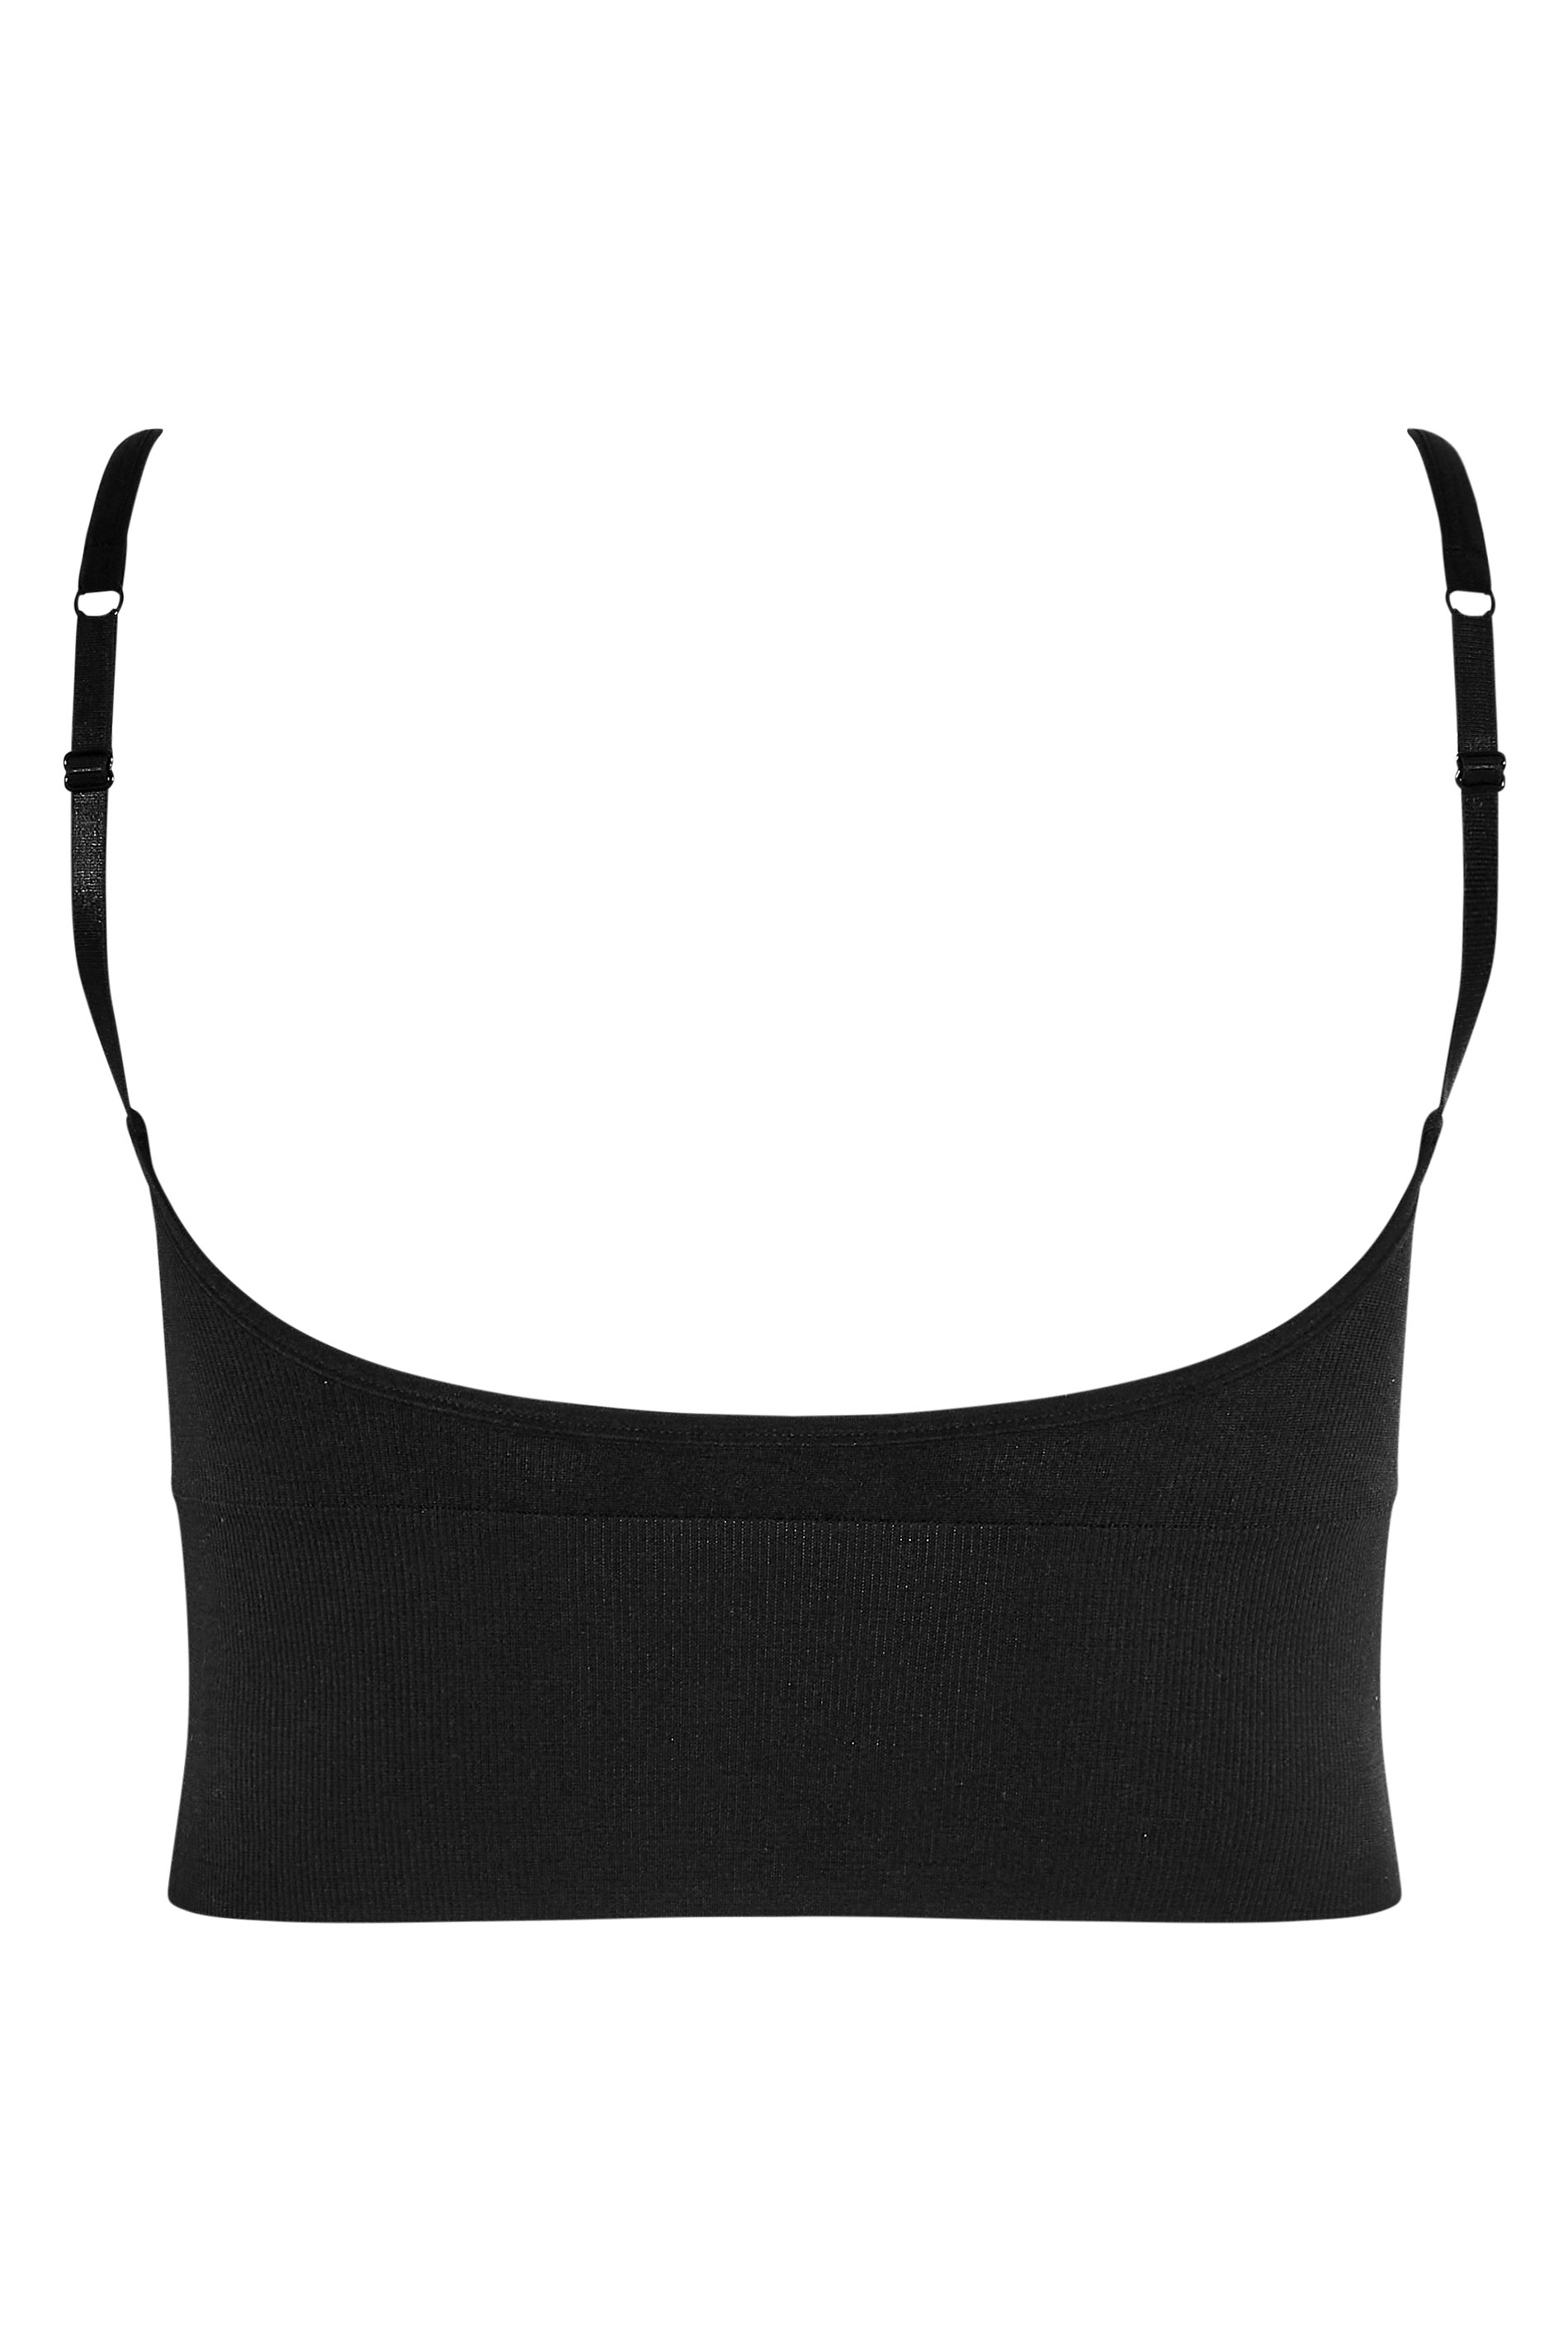 Plus Size Black Seamless Padded Crop Bralette Top | Yours Clothing